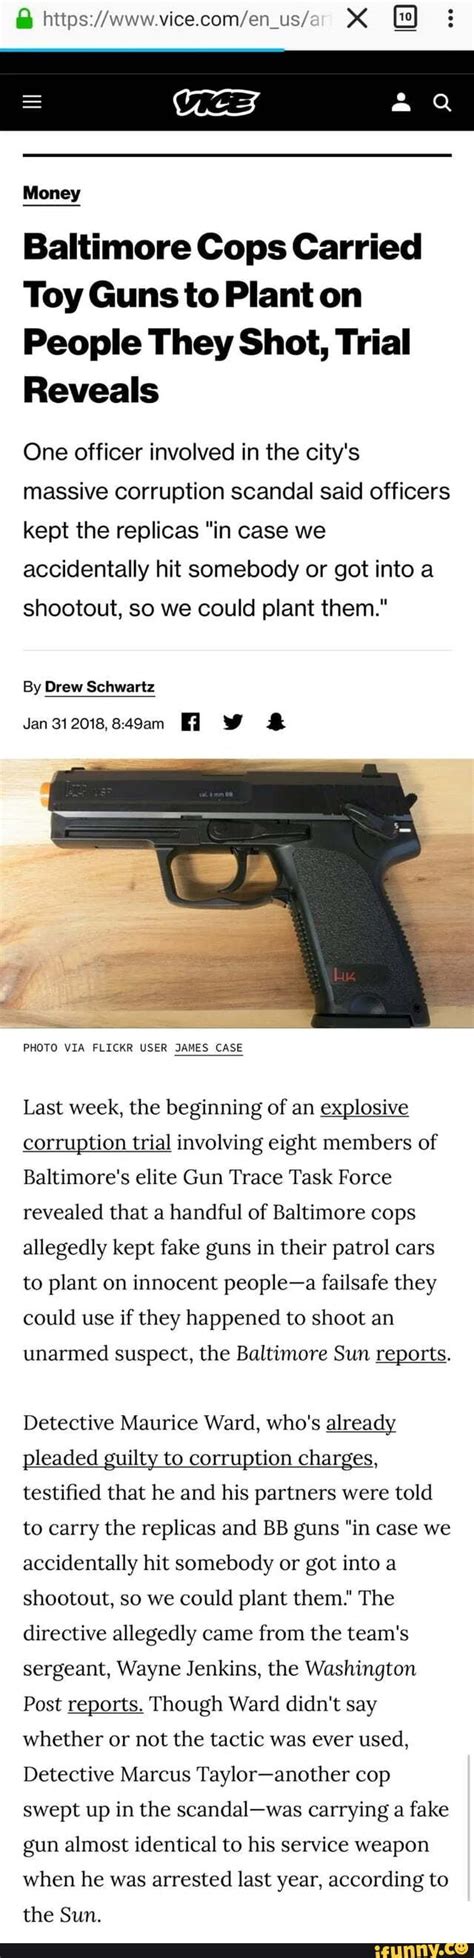 X Money Baltimore Cops Carried Toy Guns To Plant On